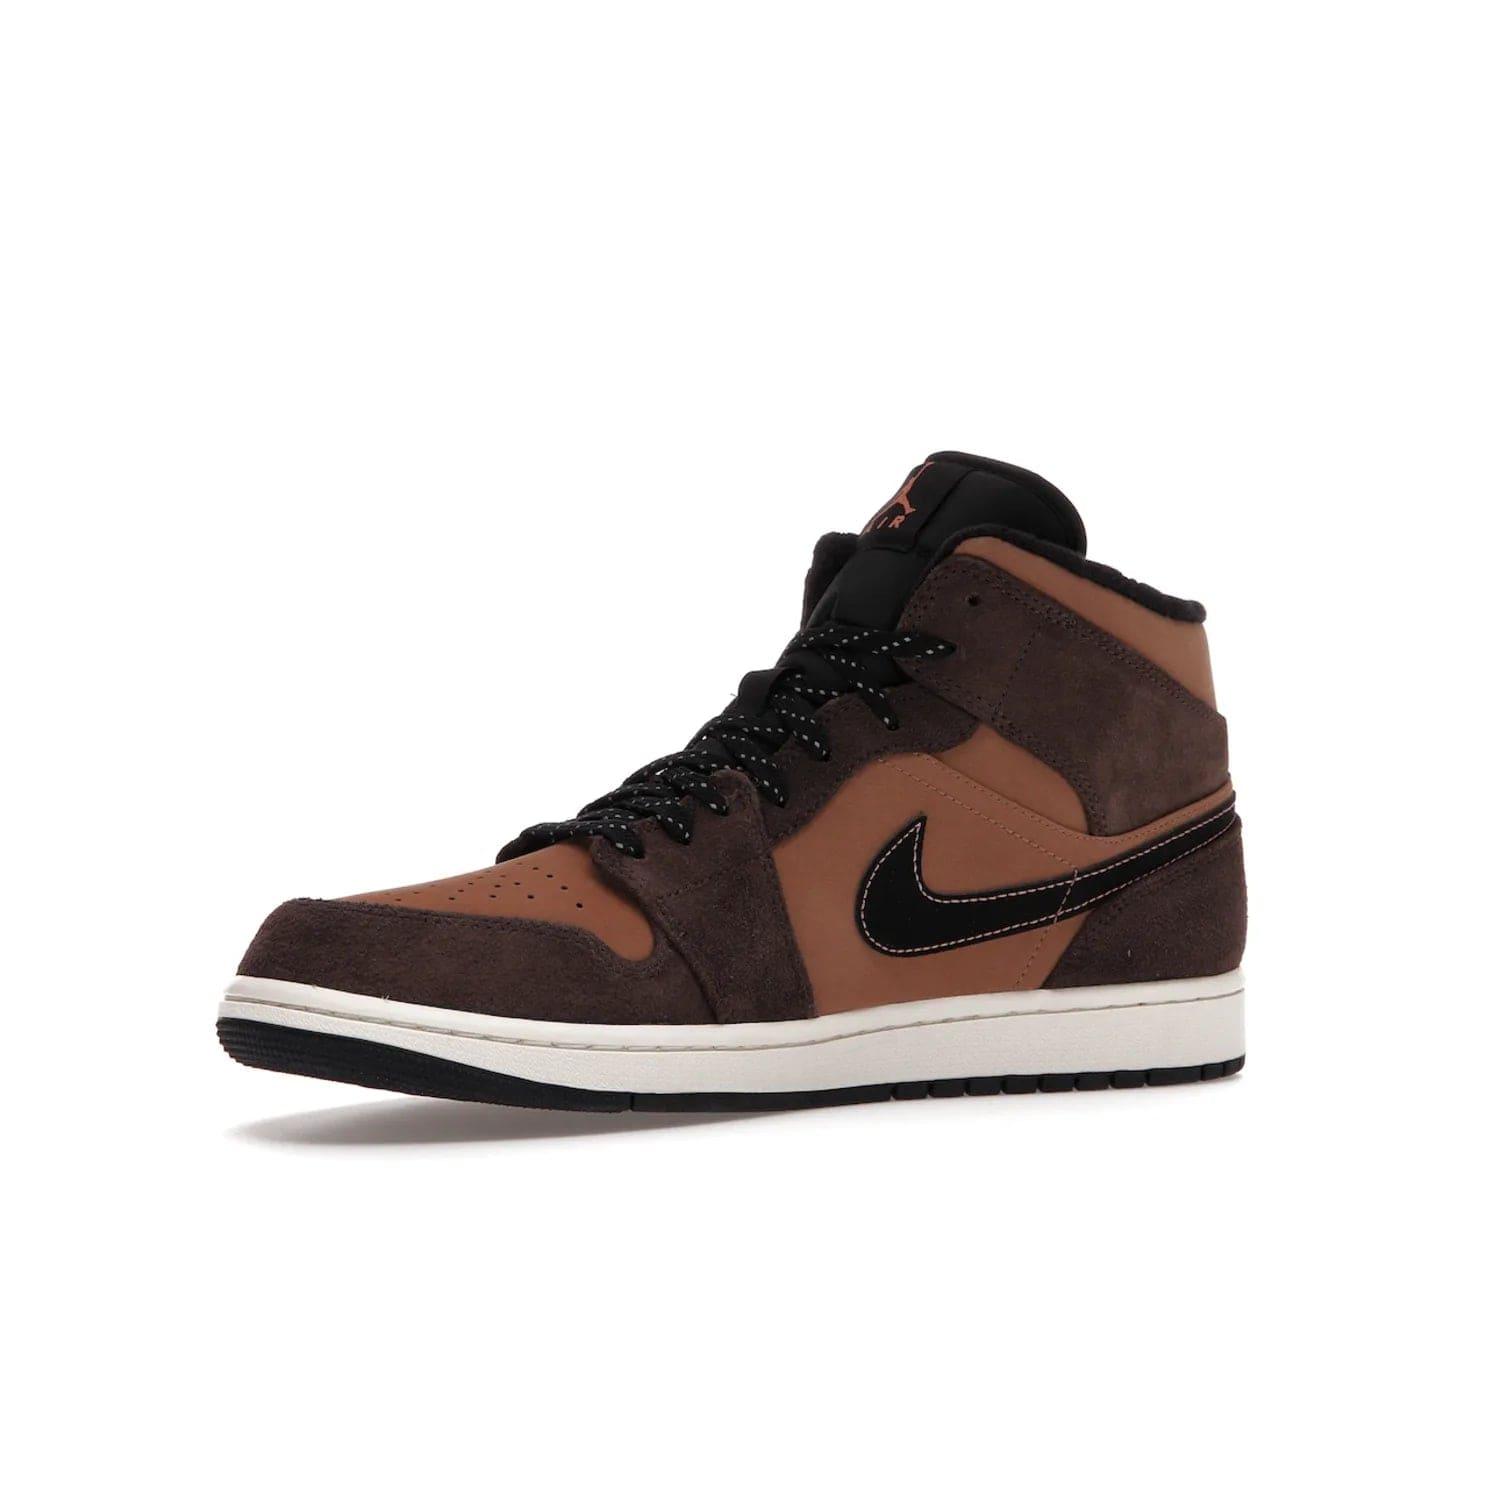 Jordan 1 Mid SE Dark Chocolate - Image 16 - Only at www.BallersClubKickz.com - This fashionable and functional Jordan 1 Mid SE Dark Chocolate features a light brown Durabuck upper, dark brown suede overlays, black Swoosh logos and reflective patch at heel. A must-have for any sneakerhead!